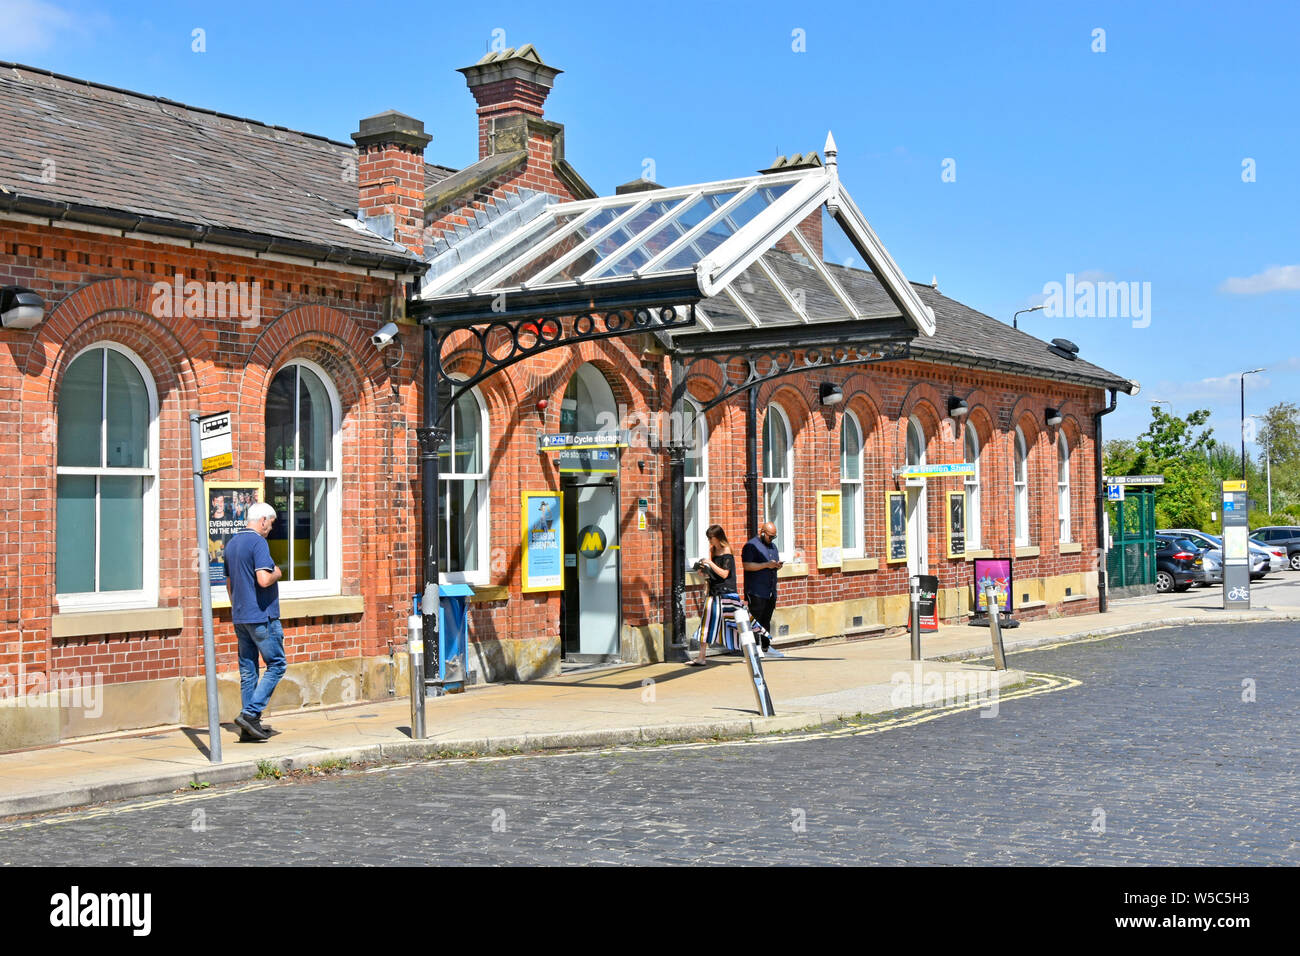 People outside Ormskirk Merseyrail Victorian old listed public transport railway station building & bus stop in cobbled street Lancashire England UK Stock Photo